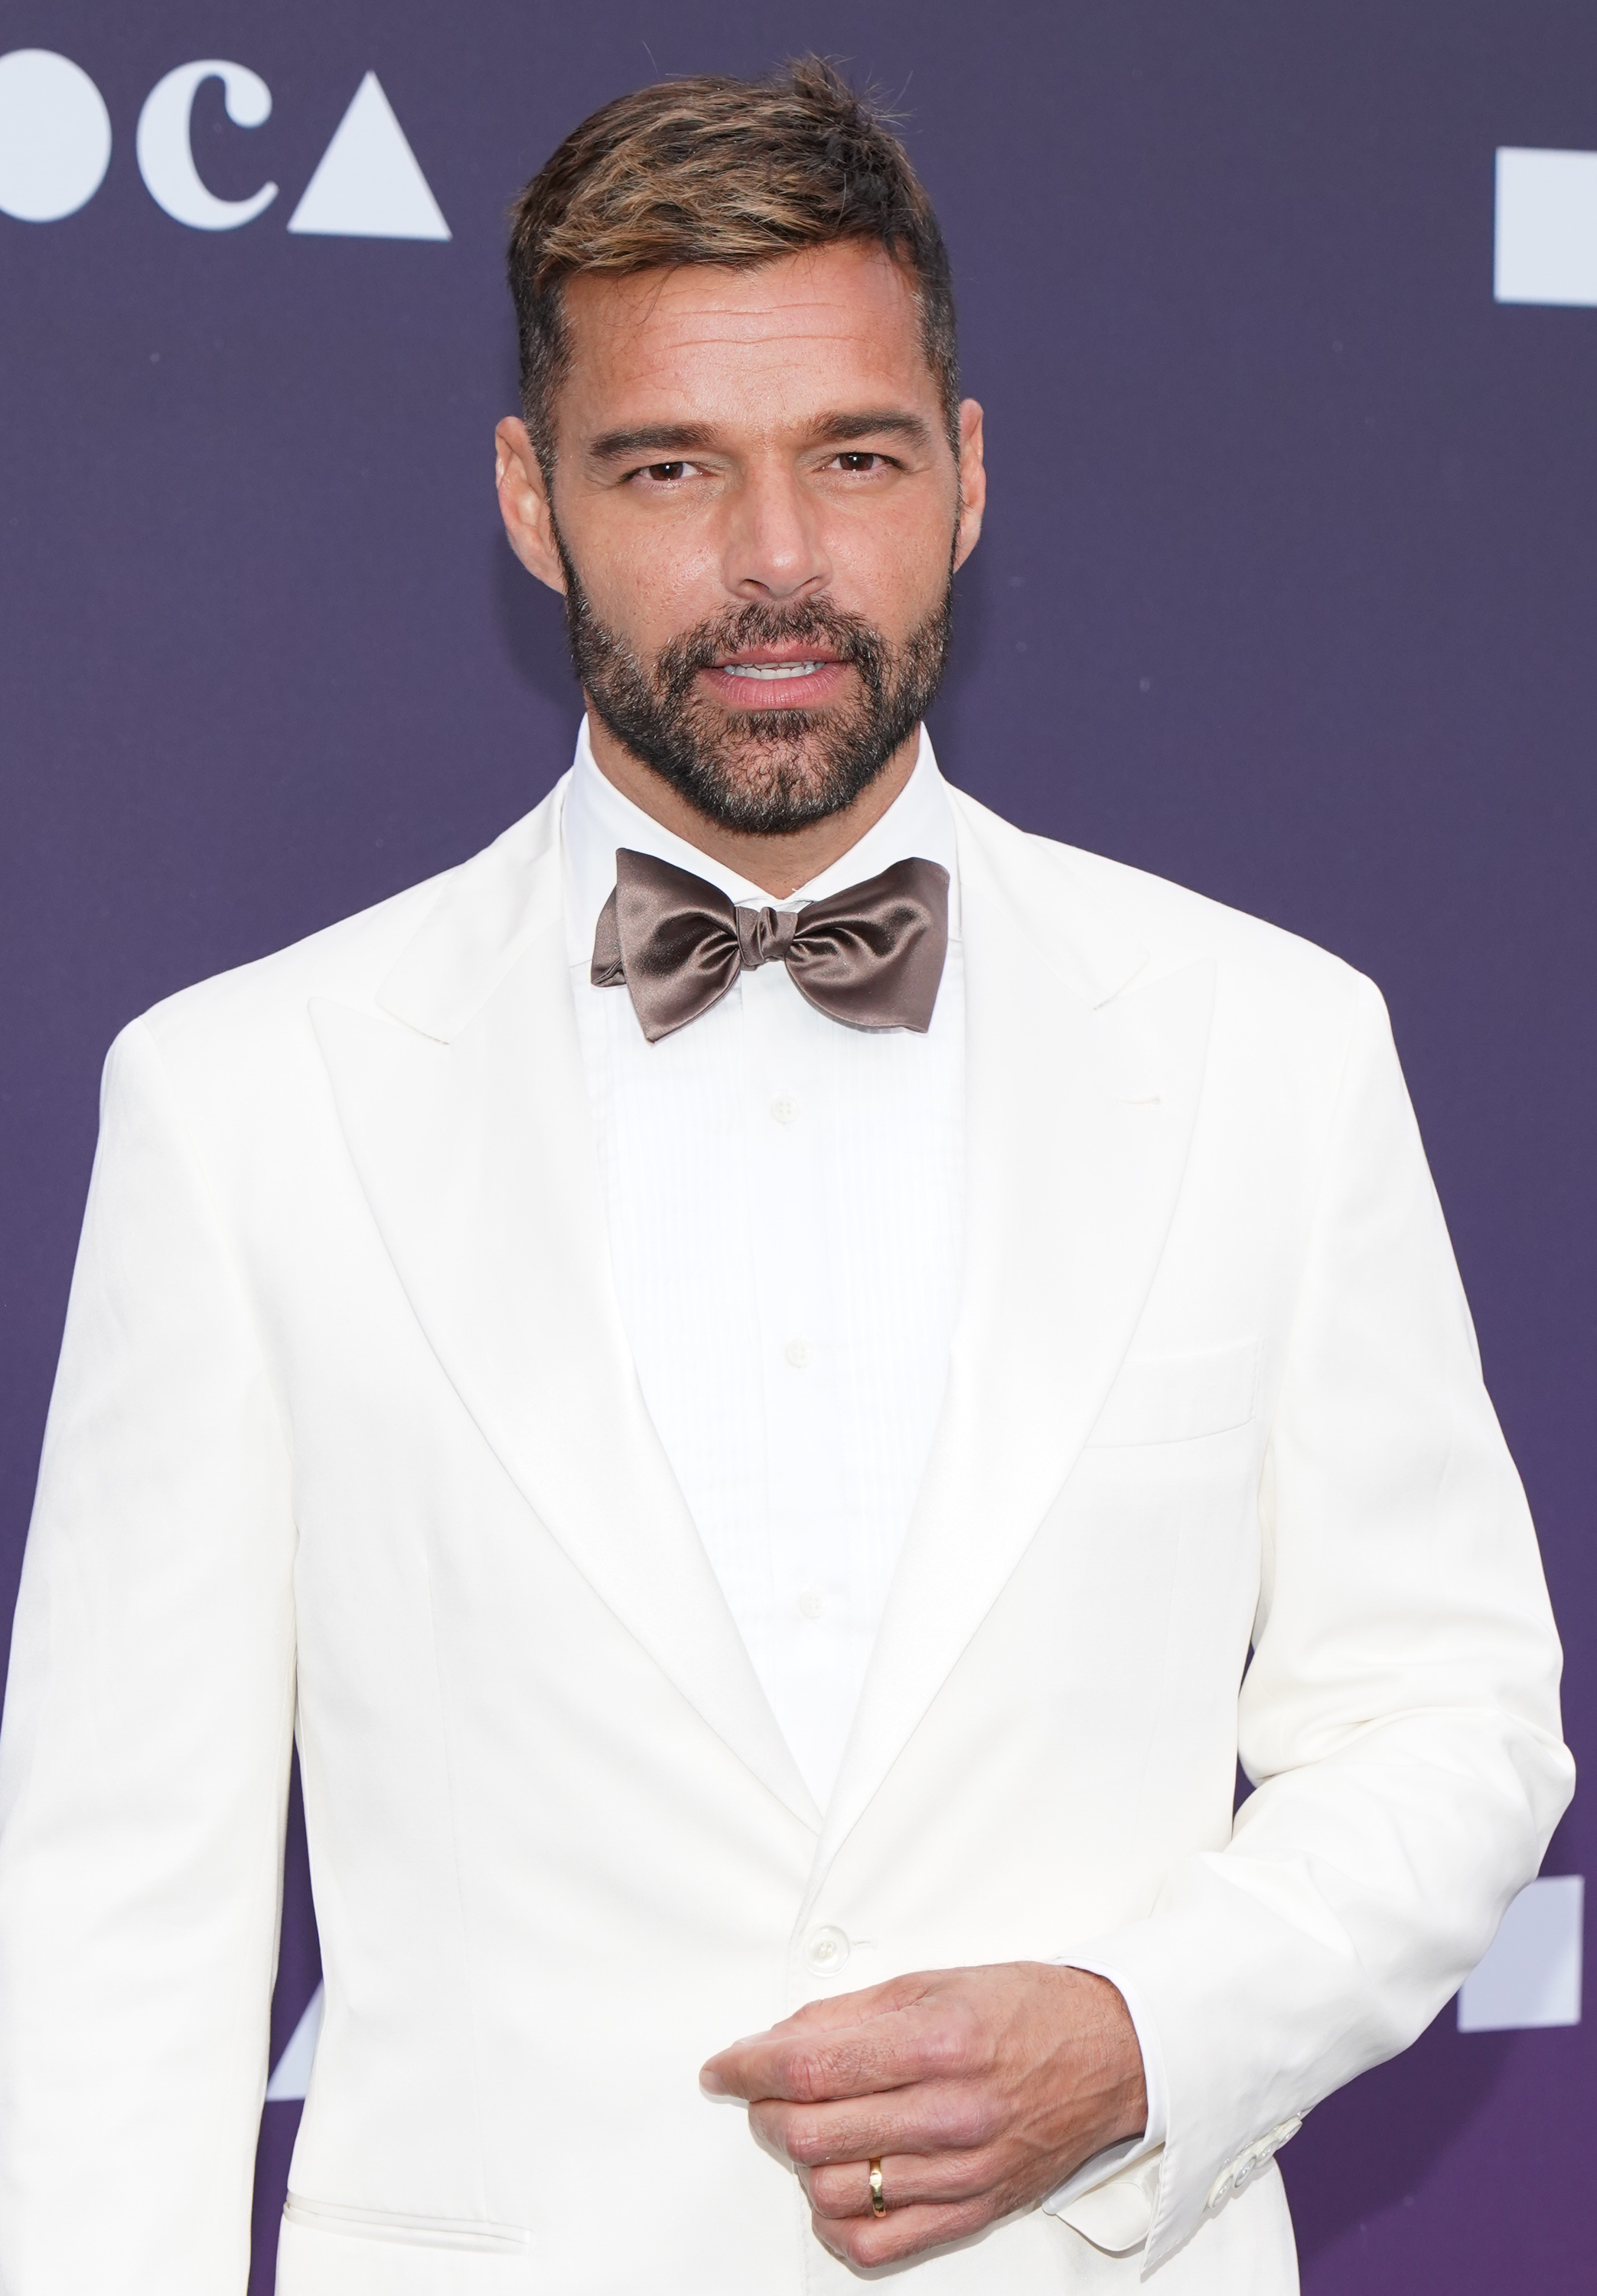 Ricky Martin attends the MOCA Benefit 2019 at The Geffen Contemporary at MOCA on May 18, 2019, in Los Angeles, California. | Source: Getty Images